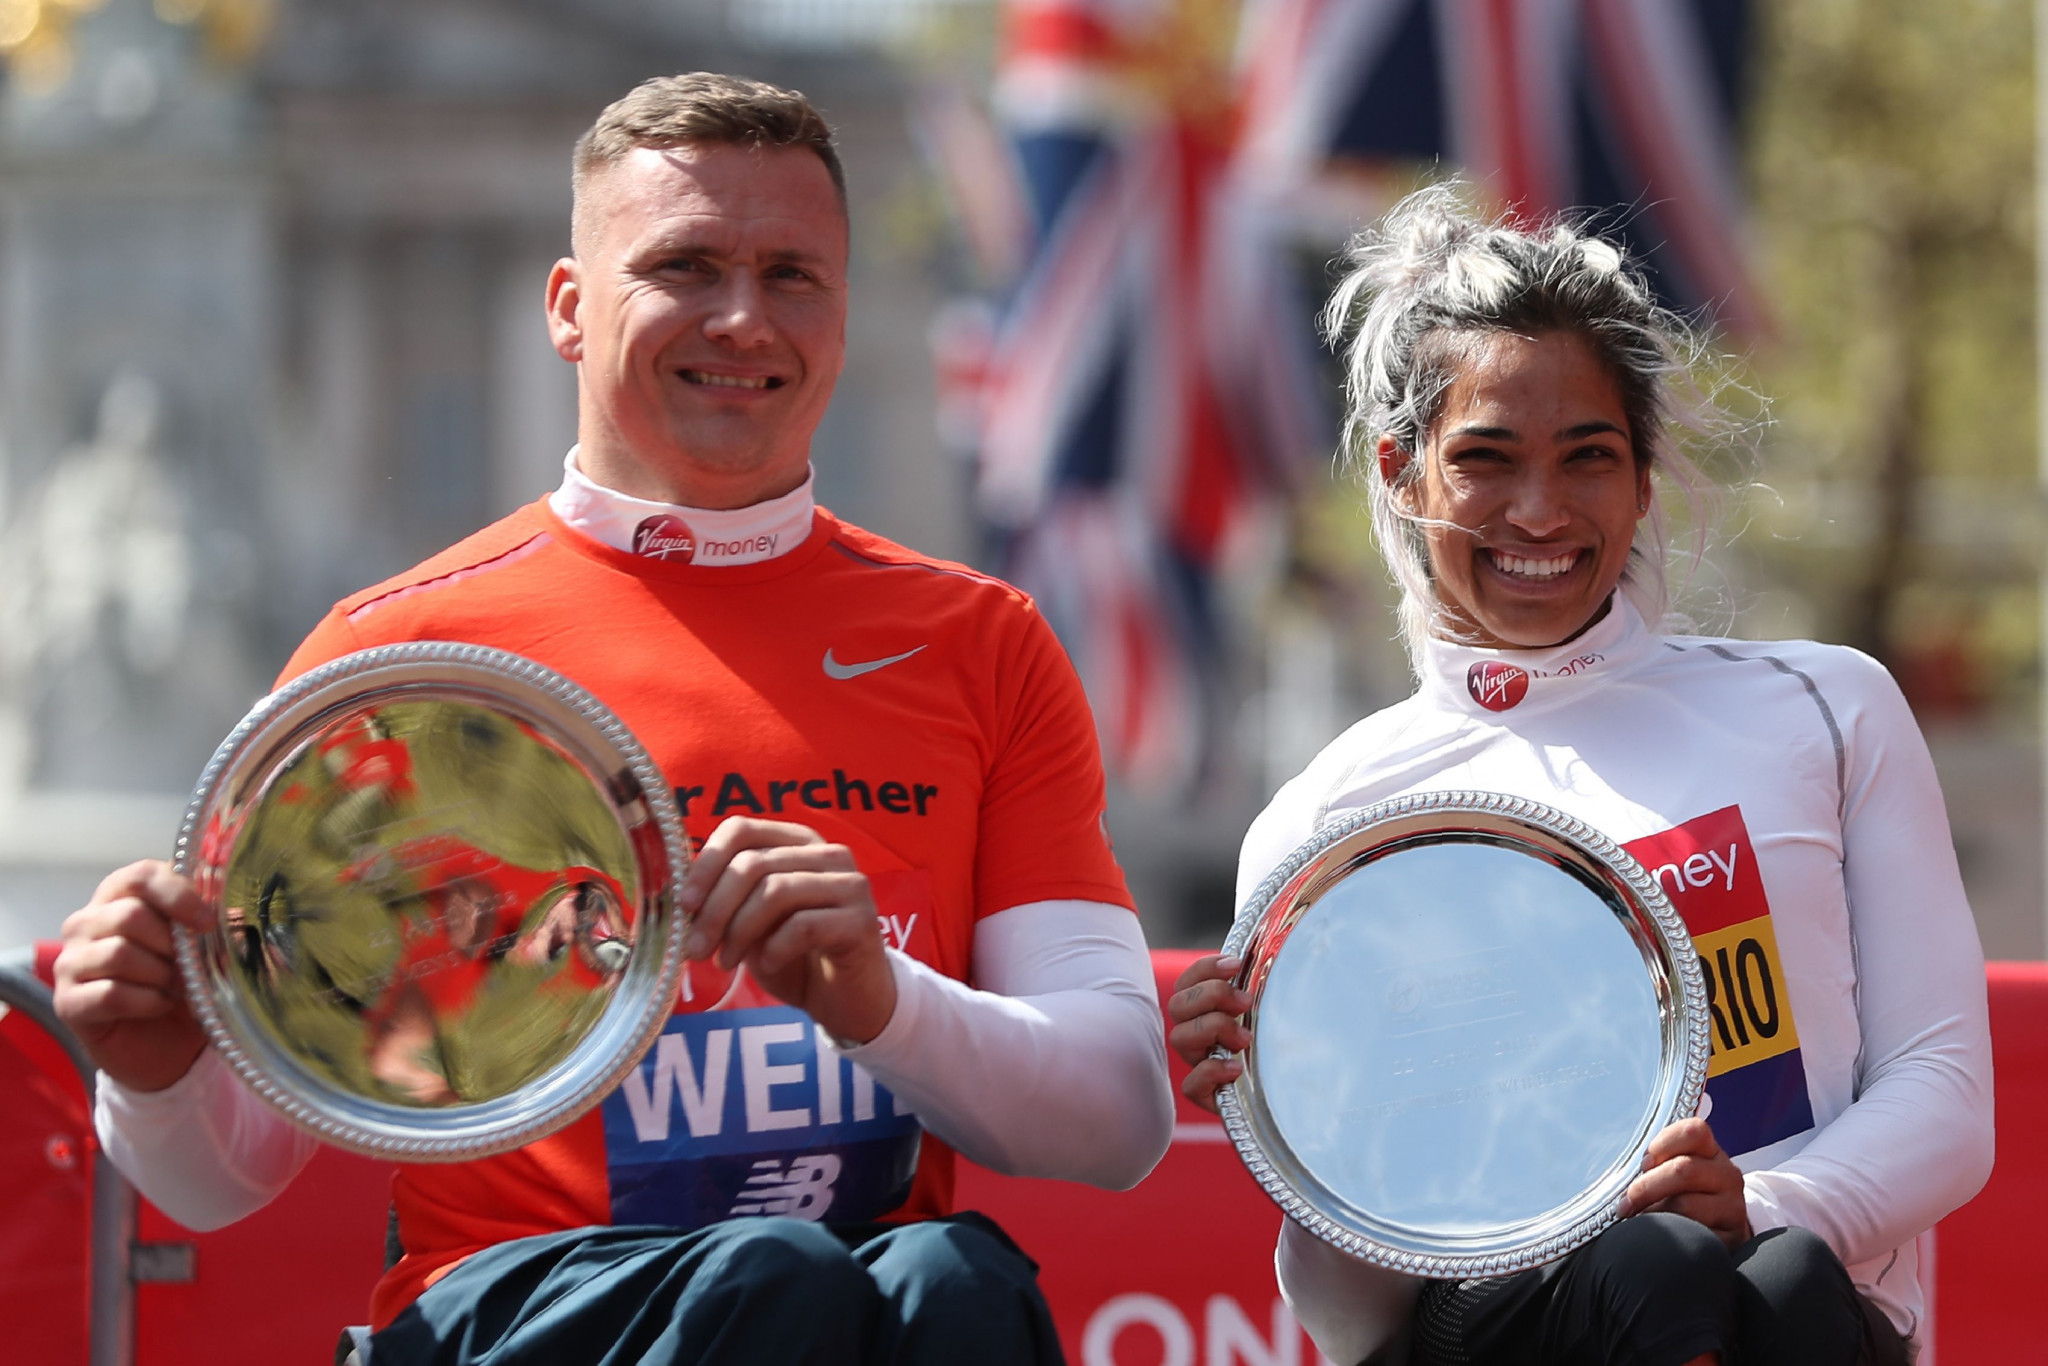 Multiple Paralympic champion Weir to make 20th consecutive London Marathon appearance